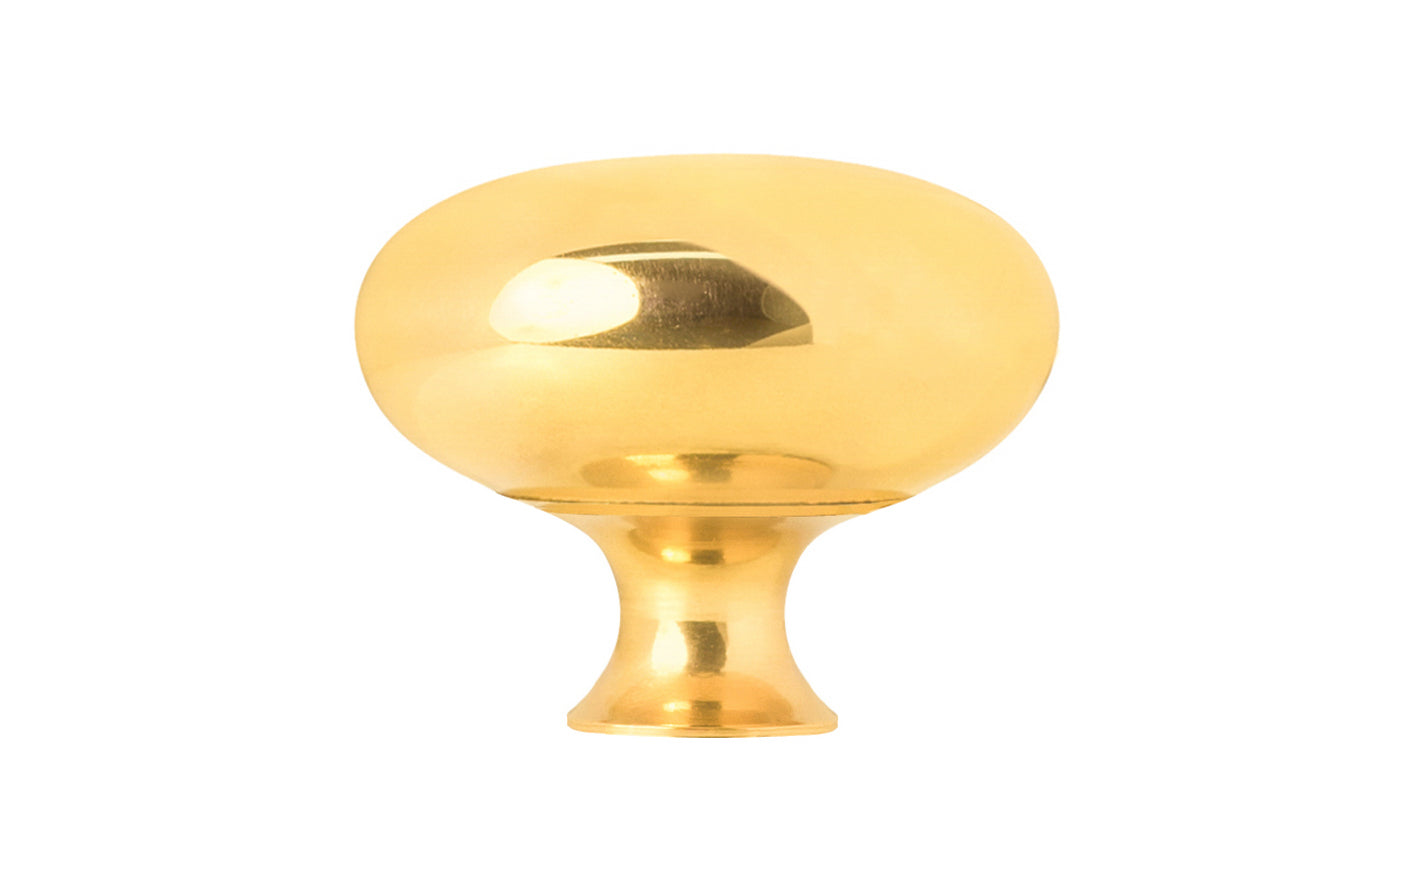 Vintage-style Hardware · Classic & traditional solid core unlacquered solid brass cabinet knob. 1-1/4